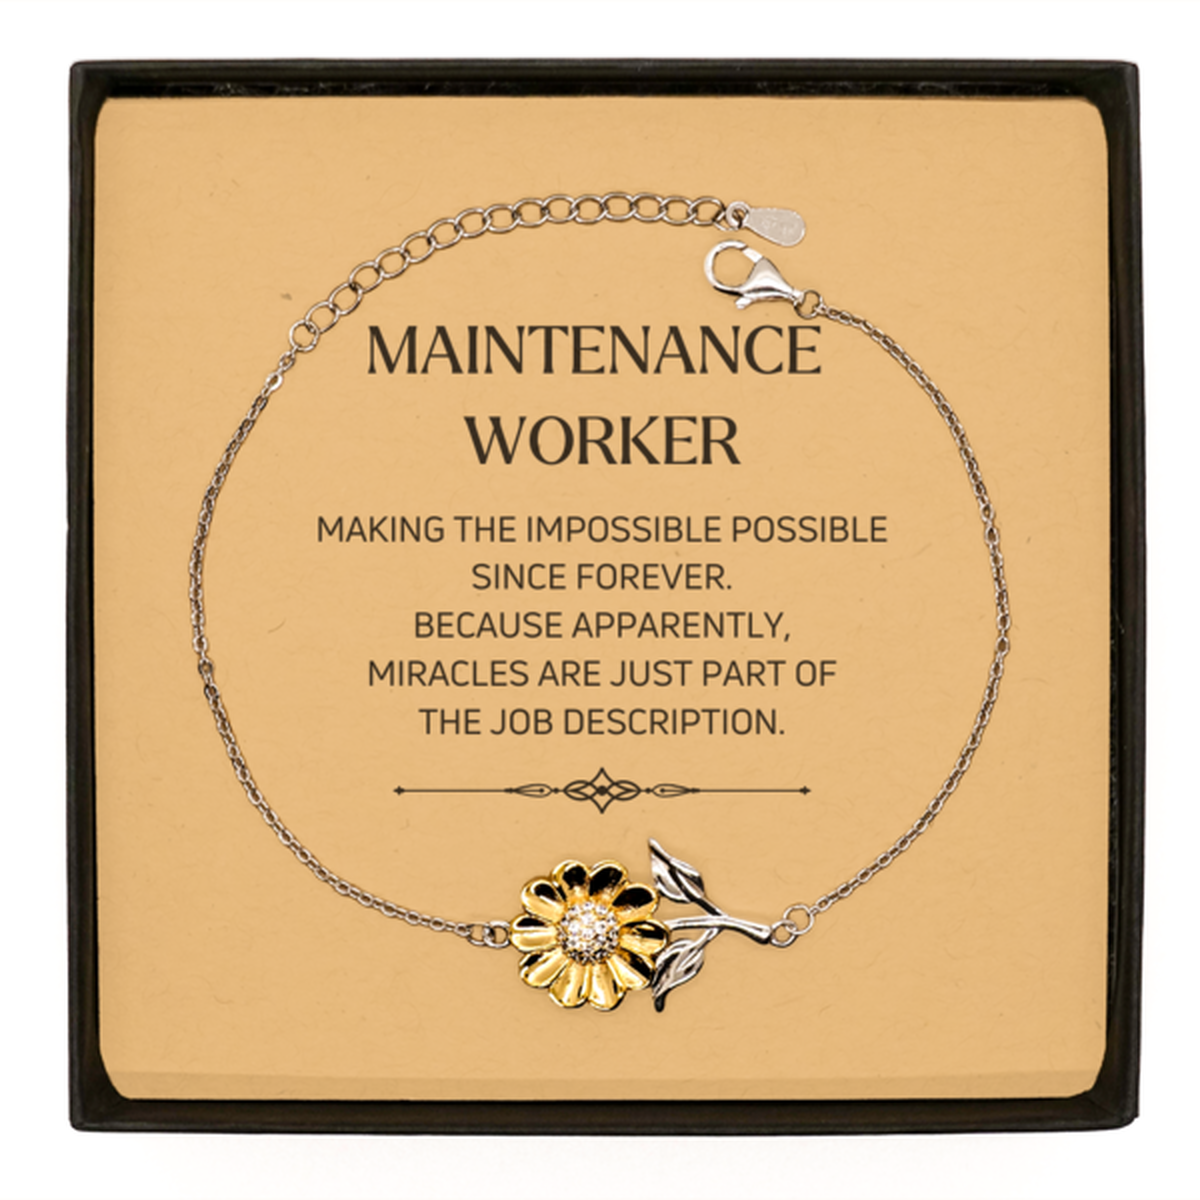 Funny Maintenance Worker Gifts, Miracles are just part of the job description, Inspirational Birthday Sunflower Bracelet For Maintenance Worker, Men, Women, Coworkers, Friends, Boss